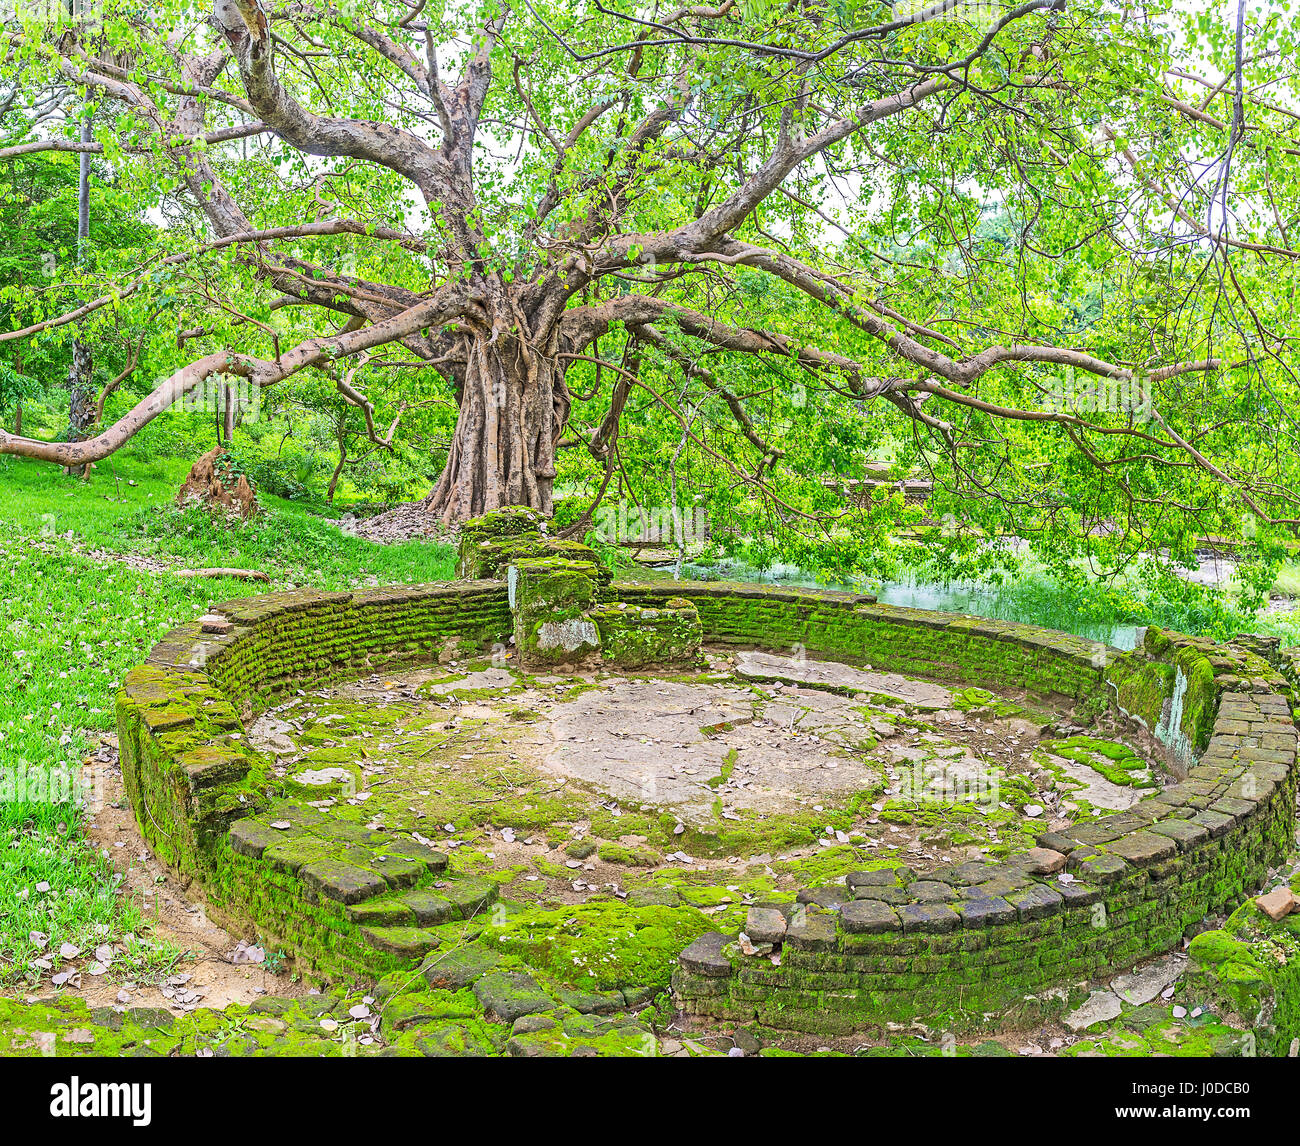 The ruins of the ancient water tank at the old spreading tree in Deepa Garden, Polonnaruwa, Sri Lanka. Stock Photo